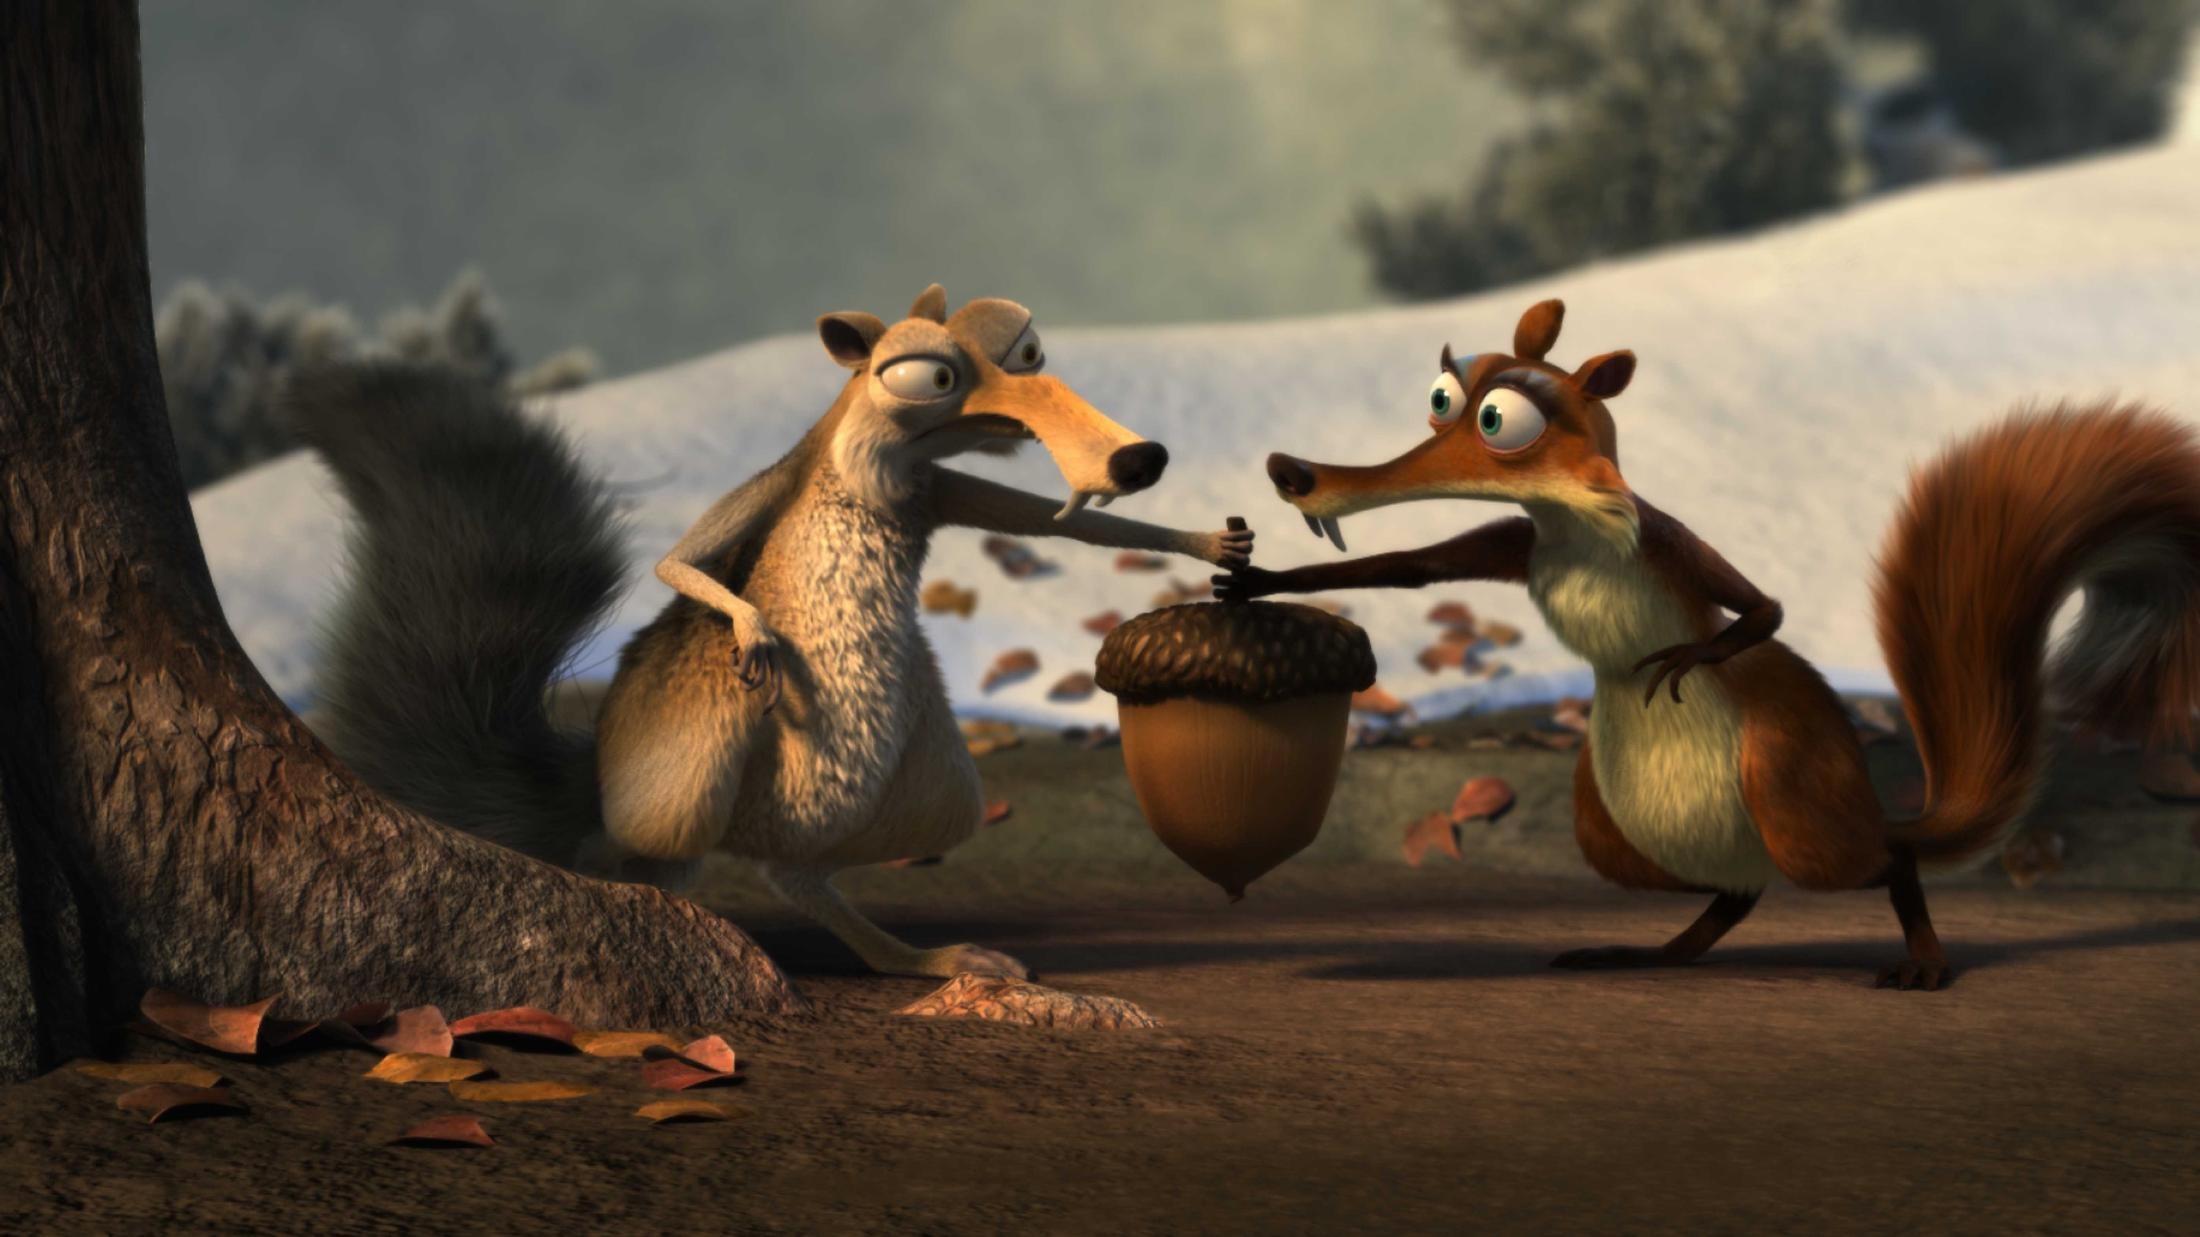 ice age 3 dawn of the dinosaurs wallpaper free